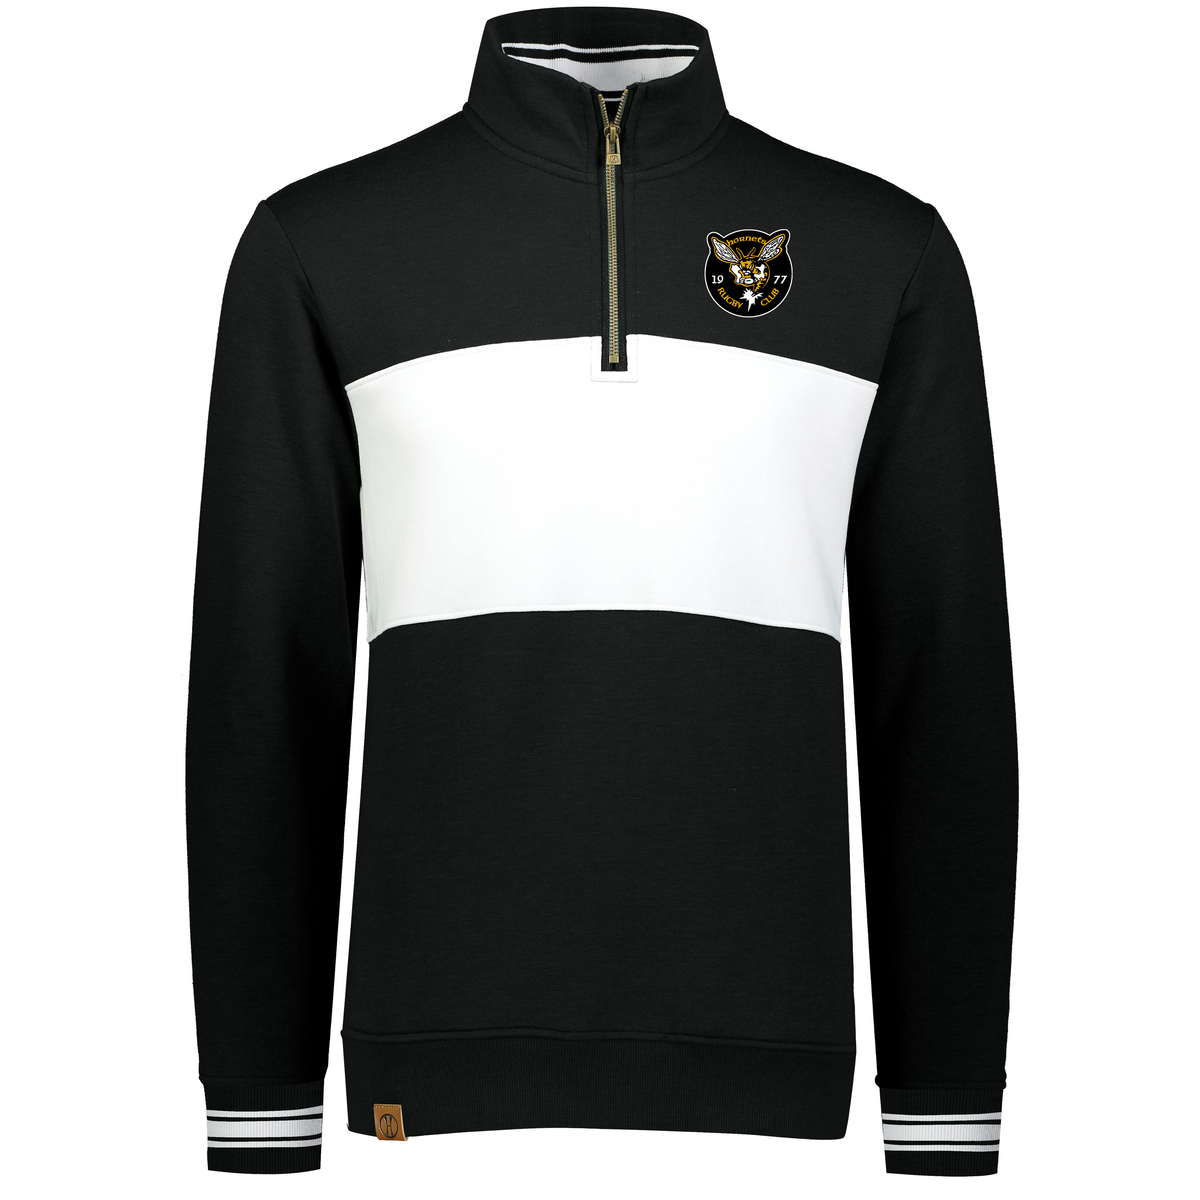 St. Louis Hornets Rugby Club Ivy League Pullover